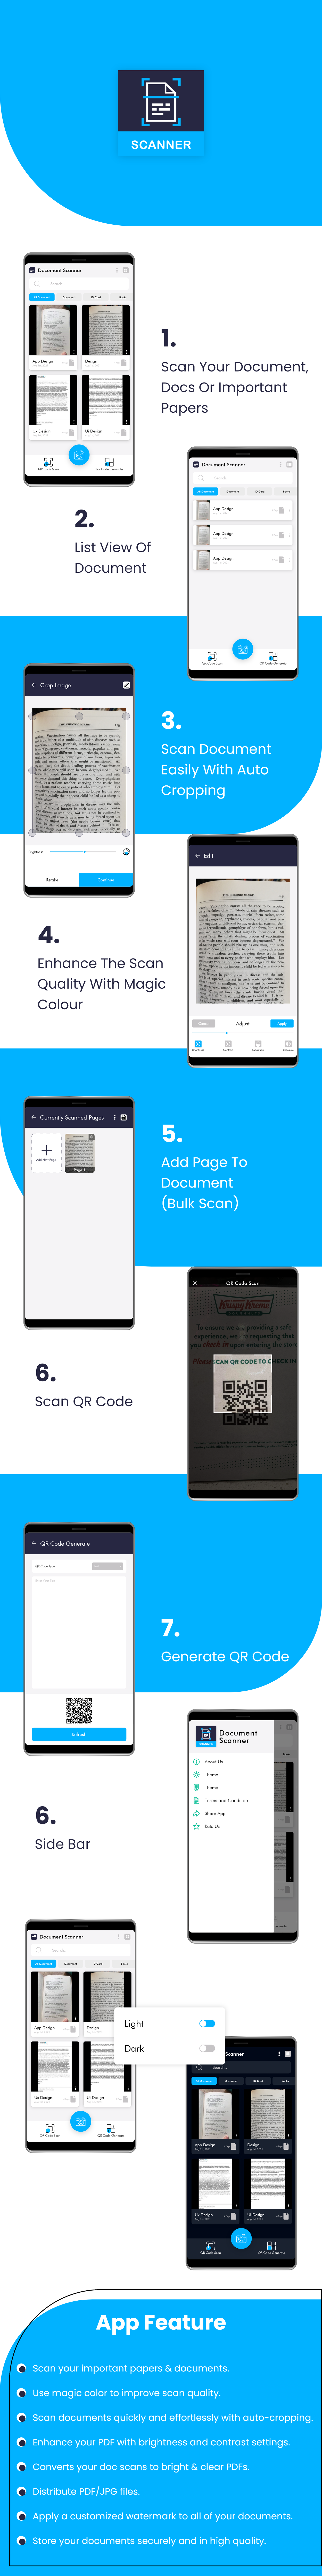 Cam Scanner - Android App - Admob Ads - Document Scanner - Doc Scanner - Premium Android Cam Scanner - 1